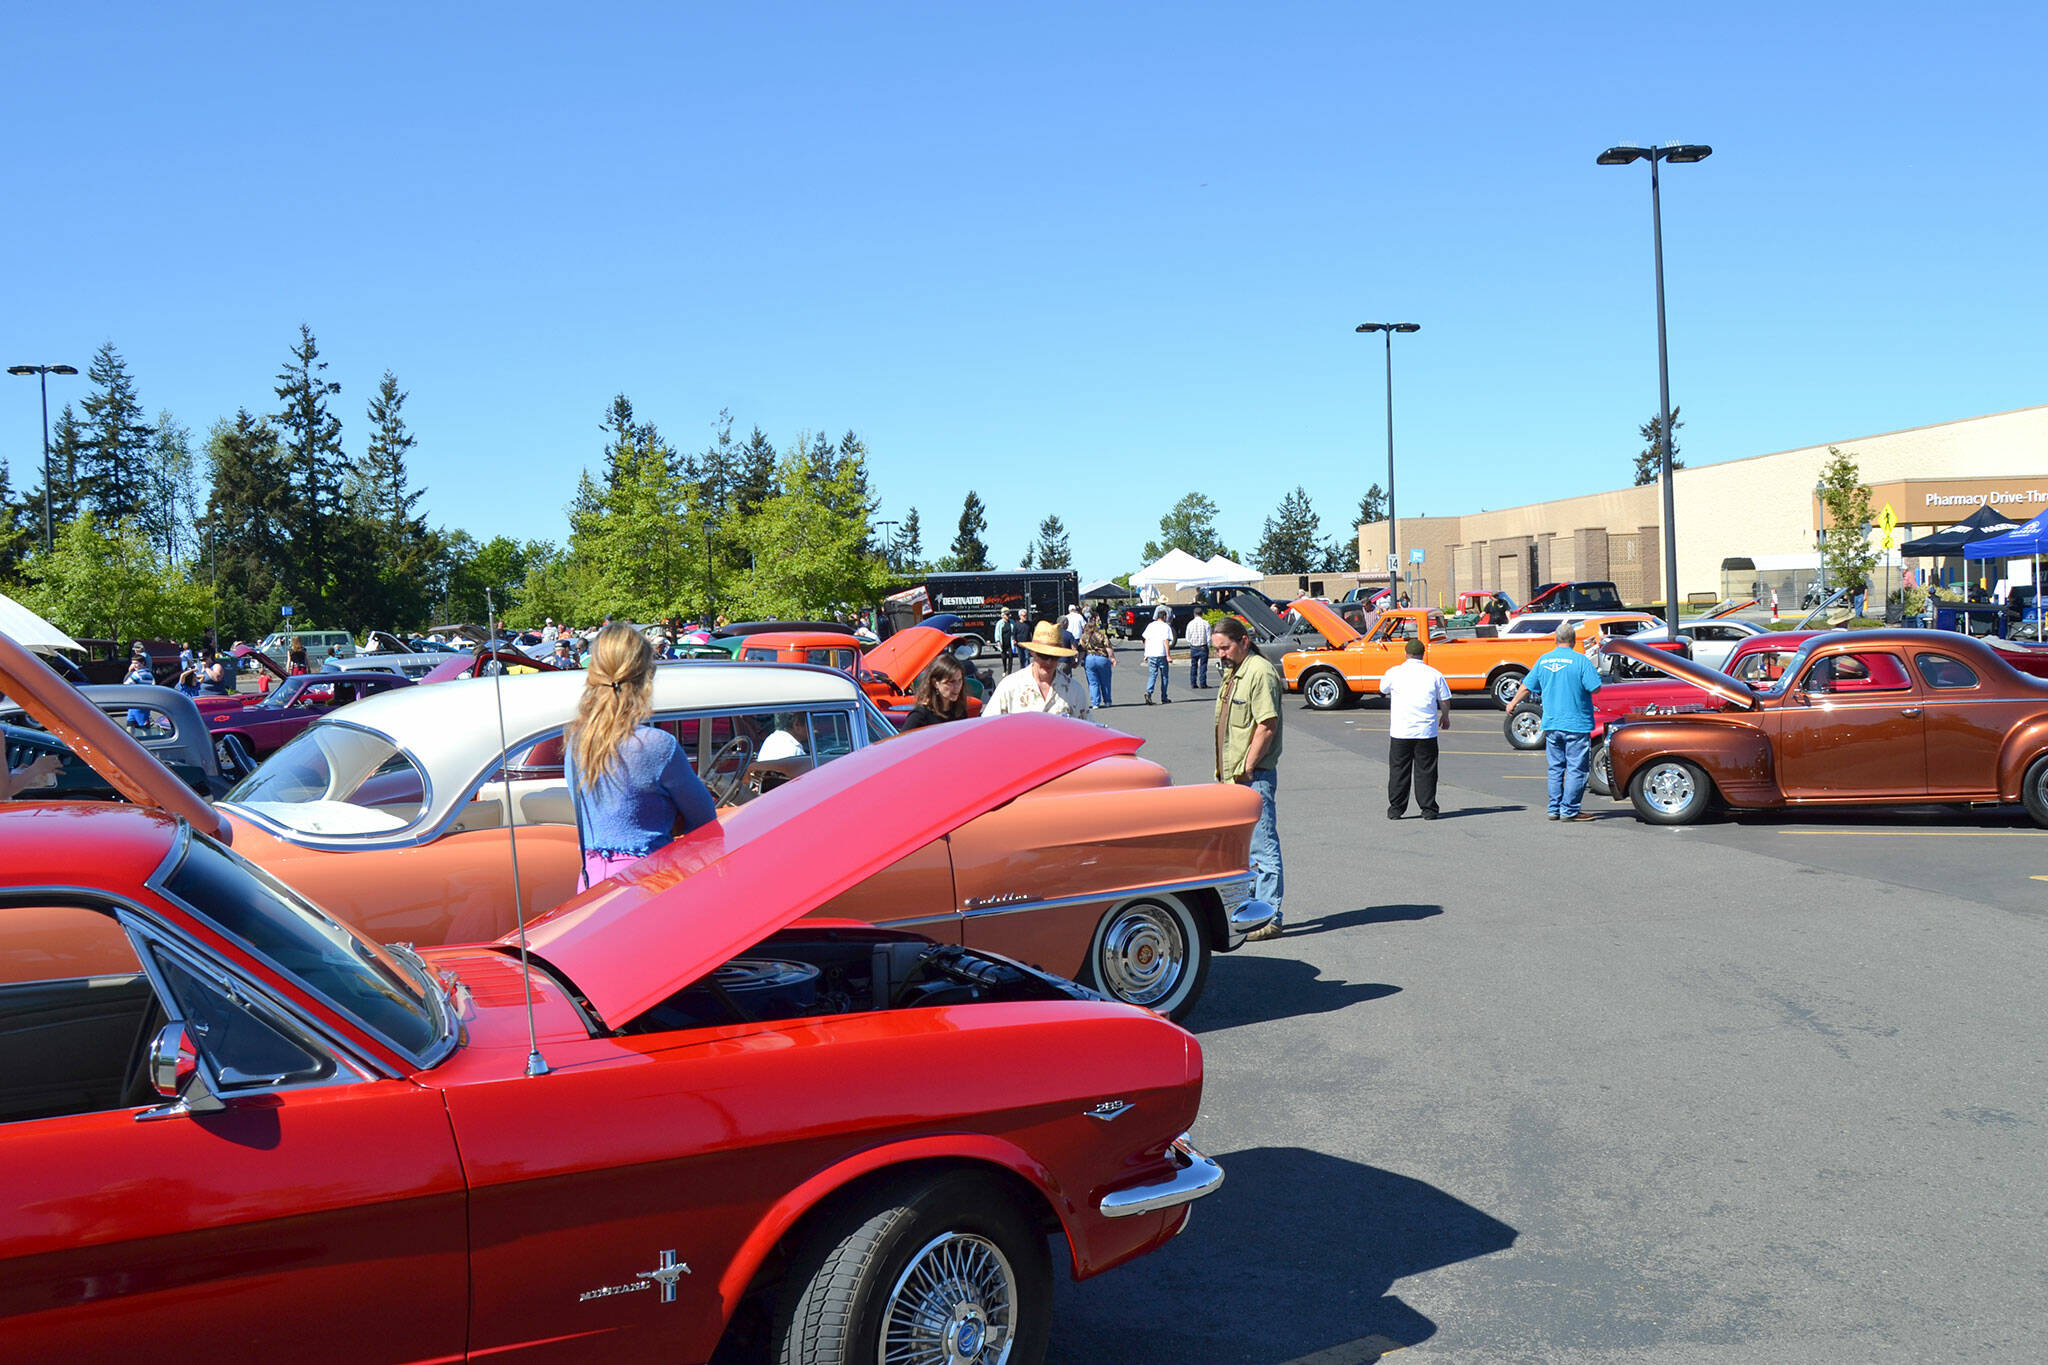 Sequim Gazette file photo by Matthew Nash / Attendees enjoy the Sequim Irrigation Festival Car Cruzz and Show in 2018. The Classic Cruise Show is back this May, with a new location for the show and judging.